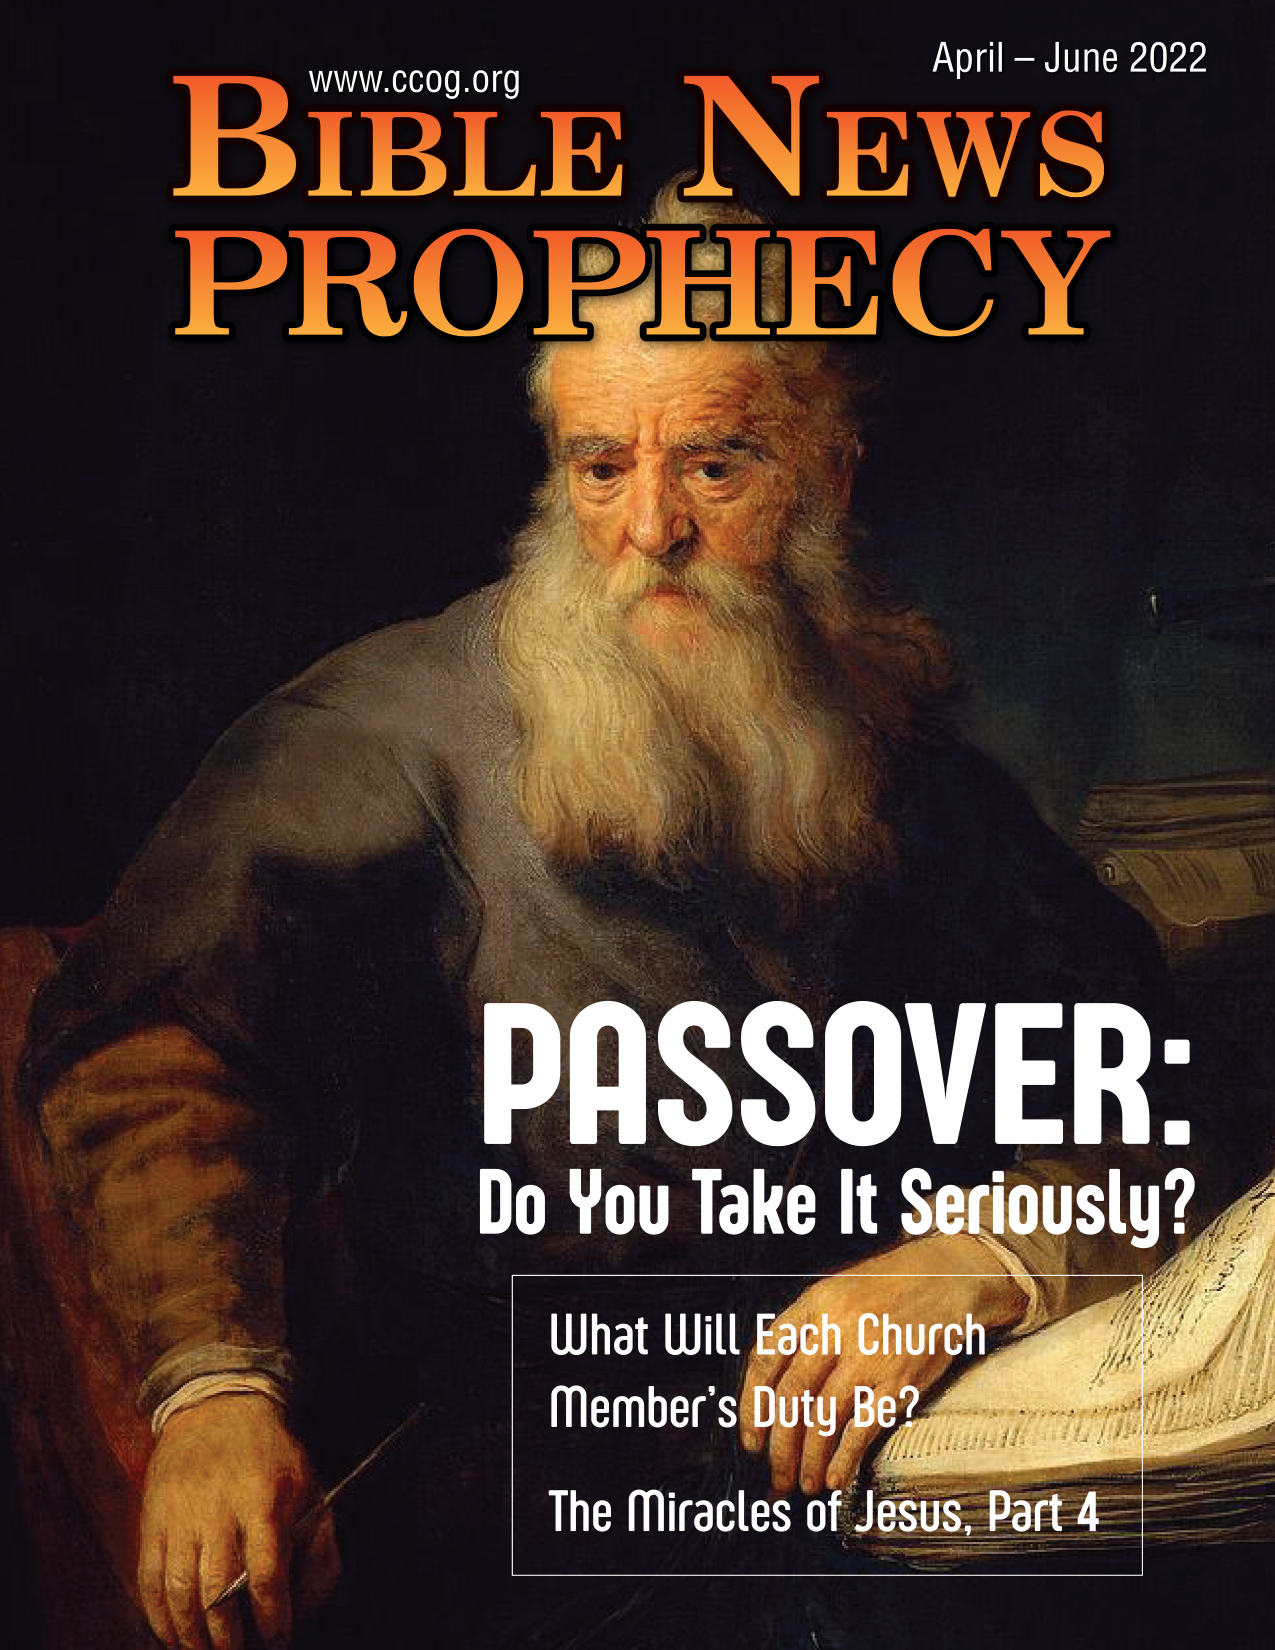 Bible News Prophecy April – June 2022: Passover: Do You Take It Seriously?